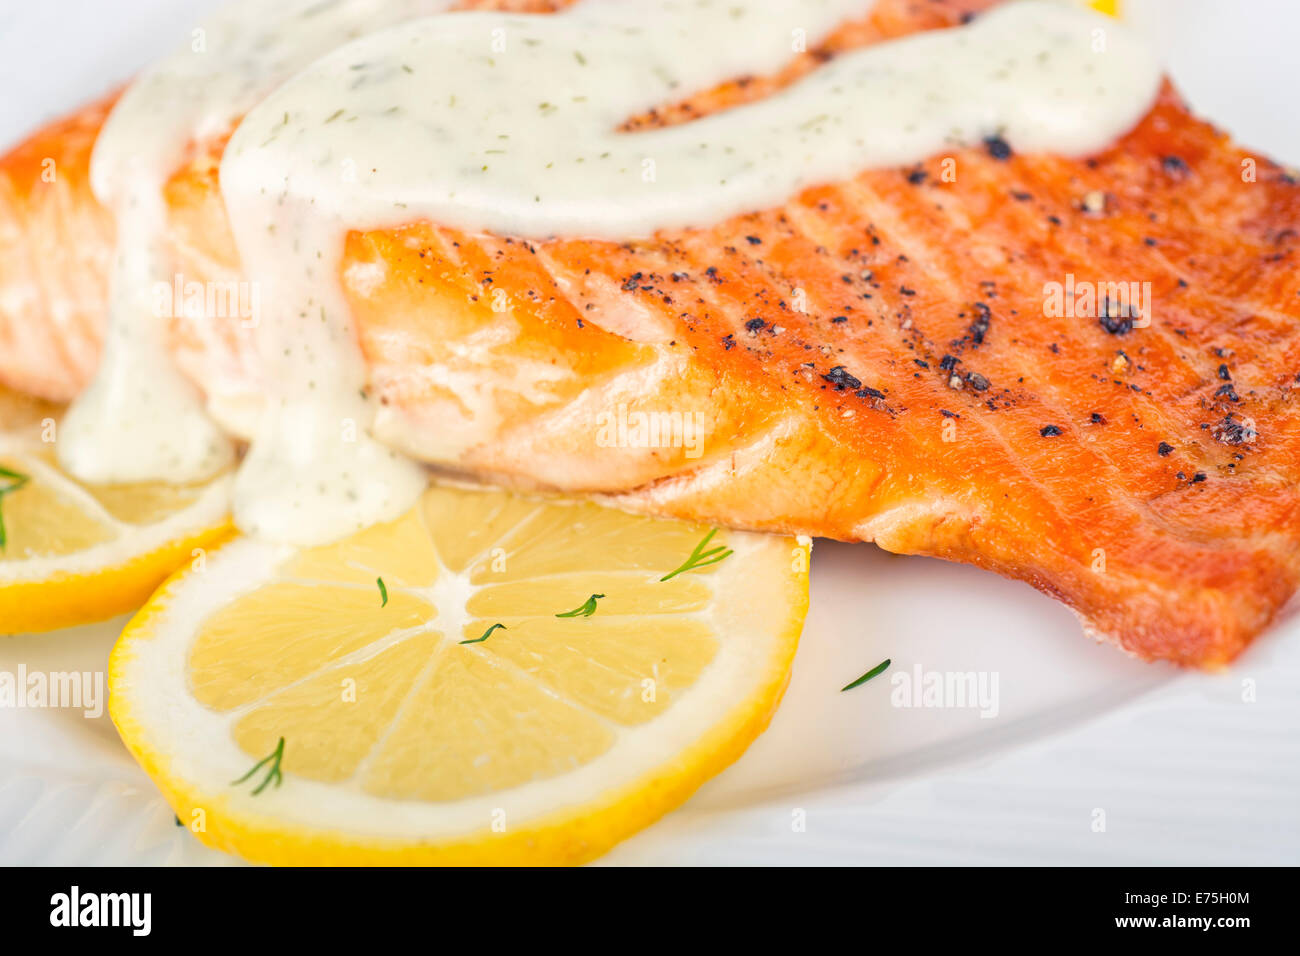 Grilled Salmon Fillet with Dill and Lemon Sauce Stock Photo